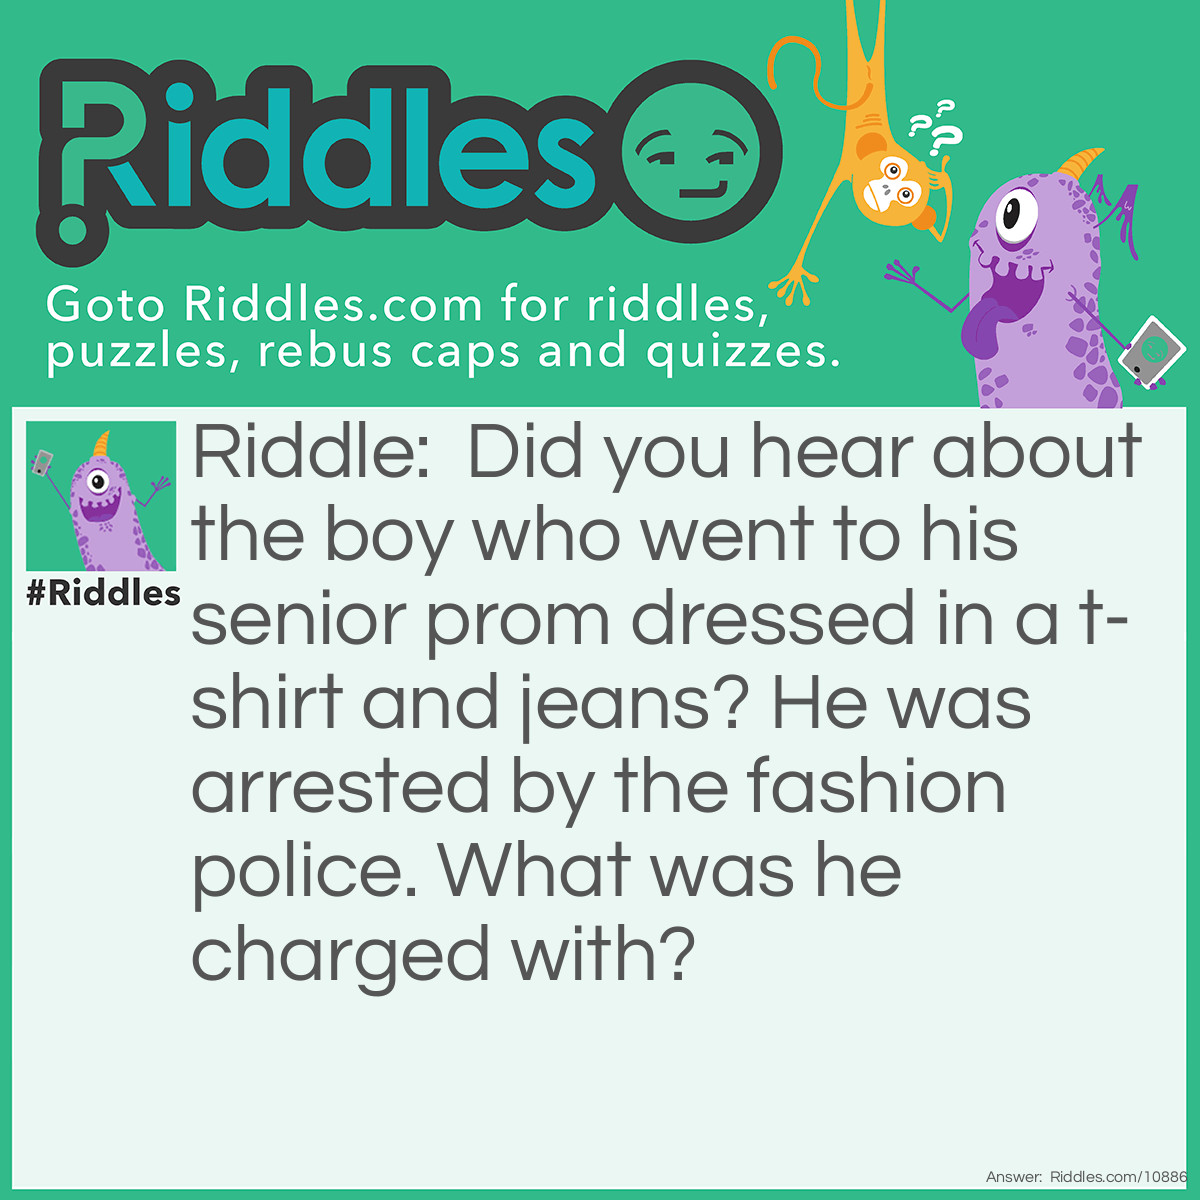 Riddle: Did you hear about the boy who went to his senior prom dressed in a t-shirt and jeans? He was arrested by the fashion police. What was he charged with? Answer: Tux evasion.